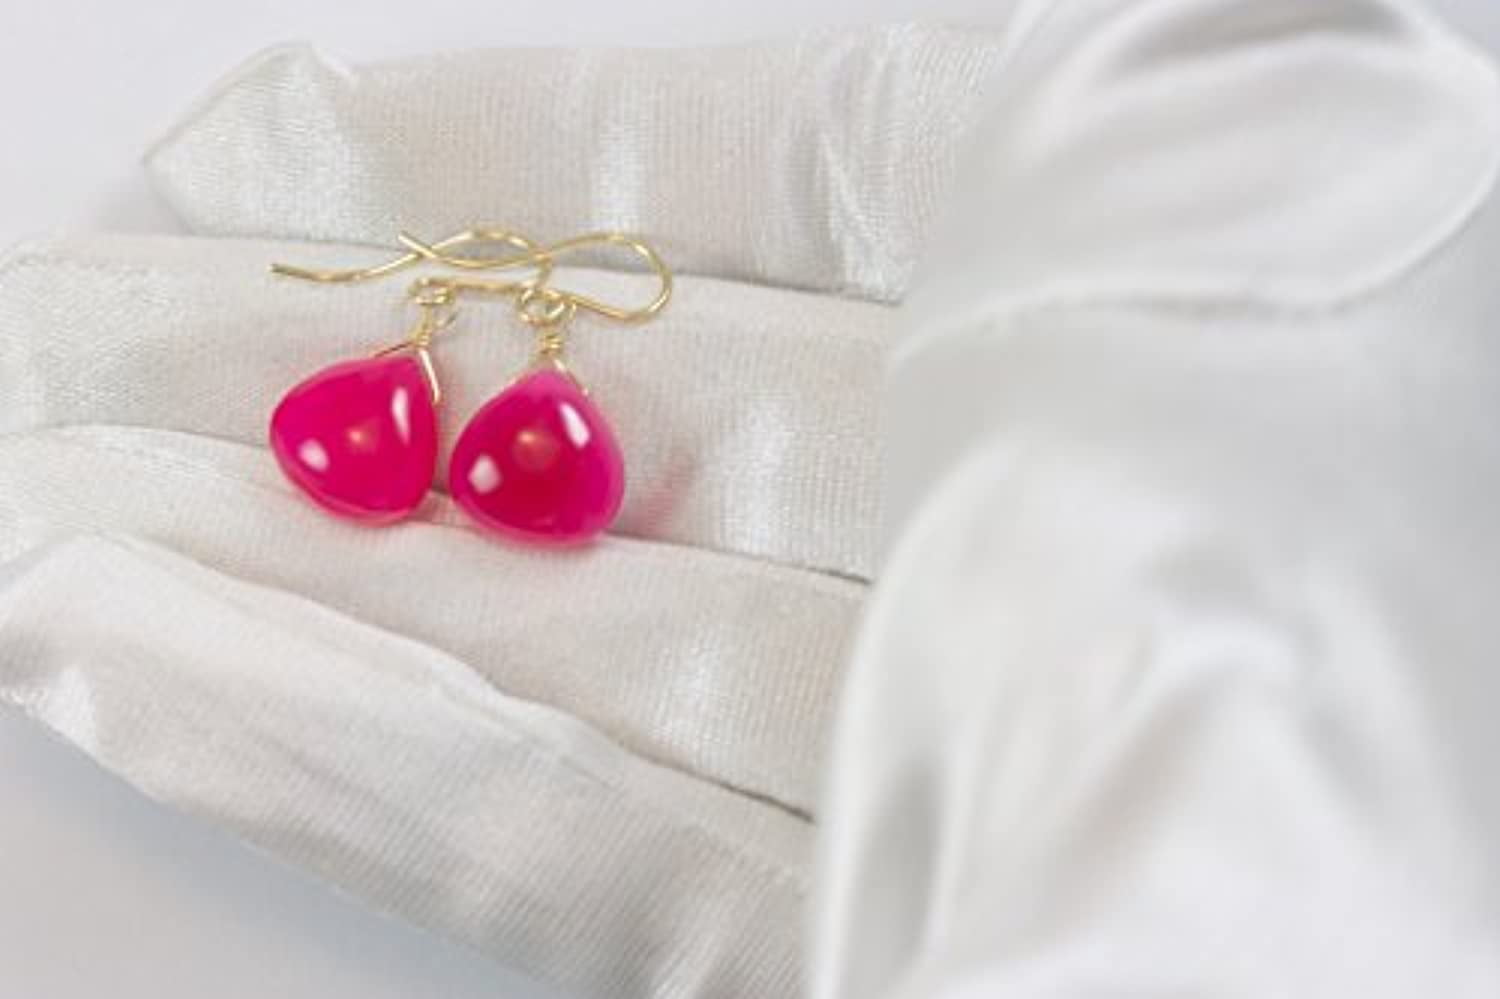 Details about   Pink Chalcedony Earrings Fuchsia Smooth Heart Teardrop 14k Gold Sterling Silver